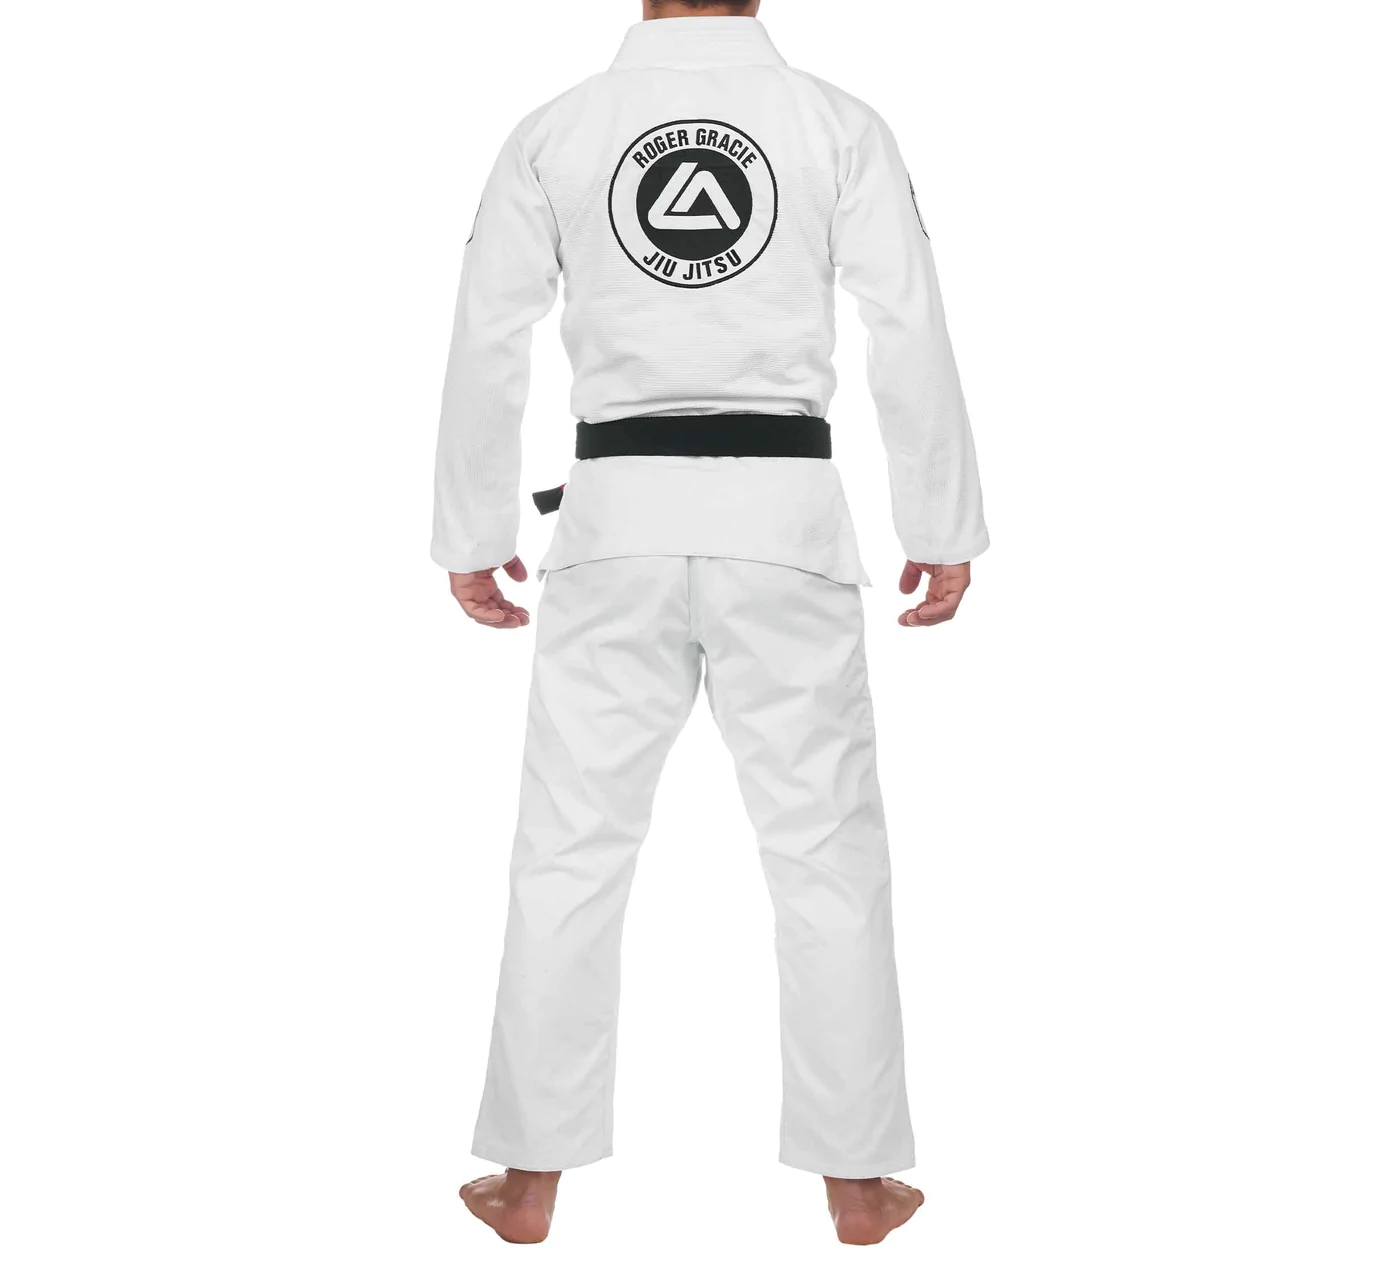 Rear view of a Roger Gracie Gi